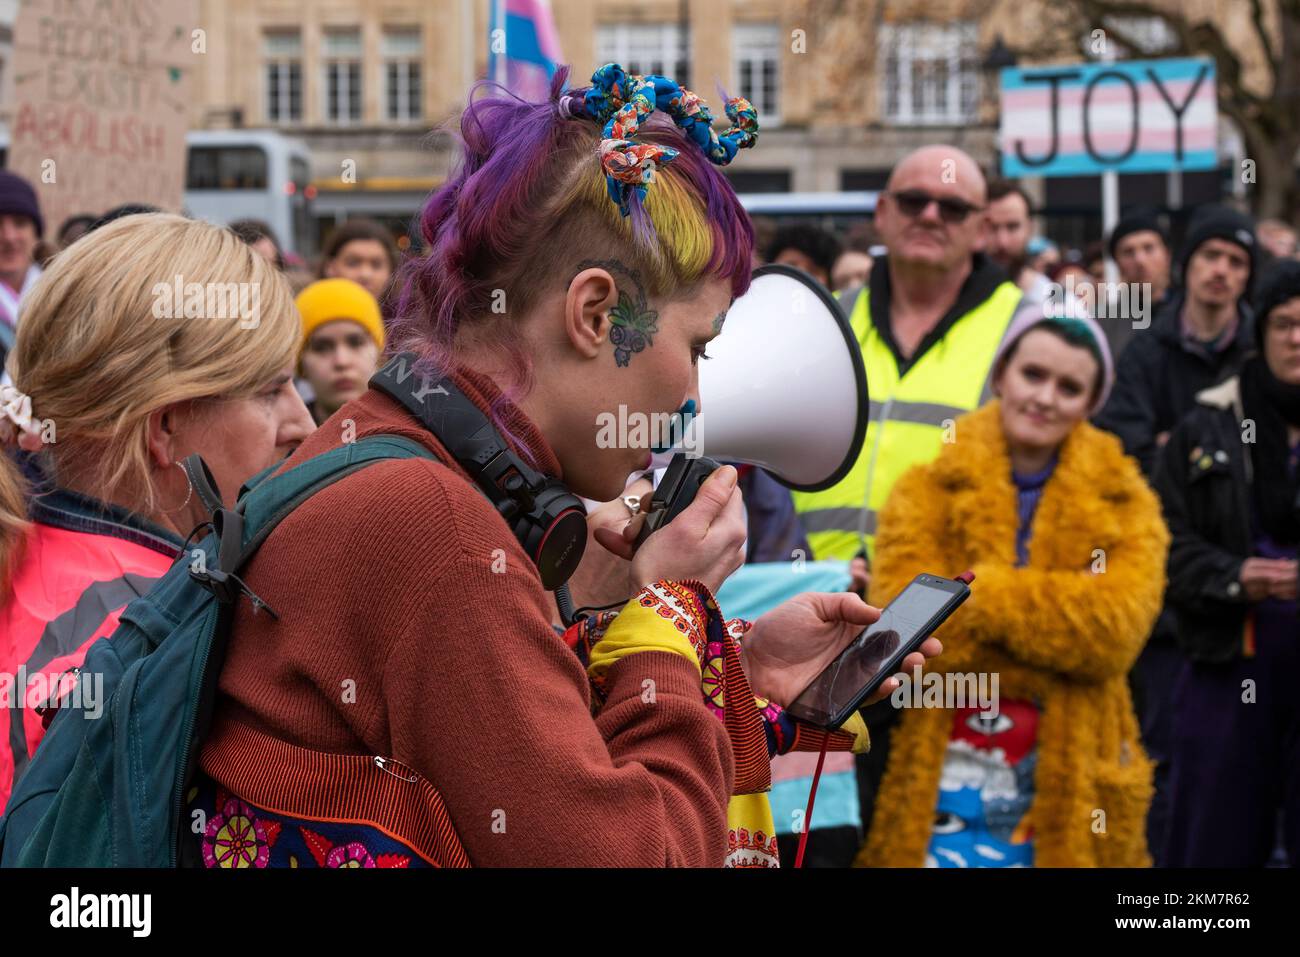 Bristol, UK. 26th November 2022. Trans Pride South West Protest and Bristol City Centre march. Gathering at College Green for speeches then marching through Bristol City centre. Credit: Stephen Bell/Alamy Live News Stock Photo